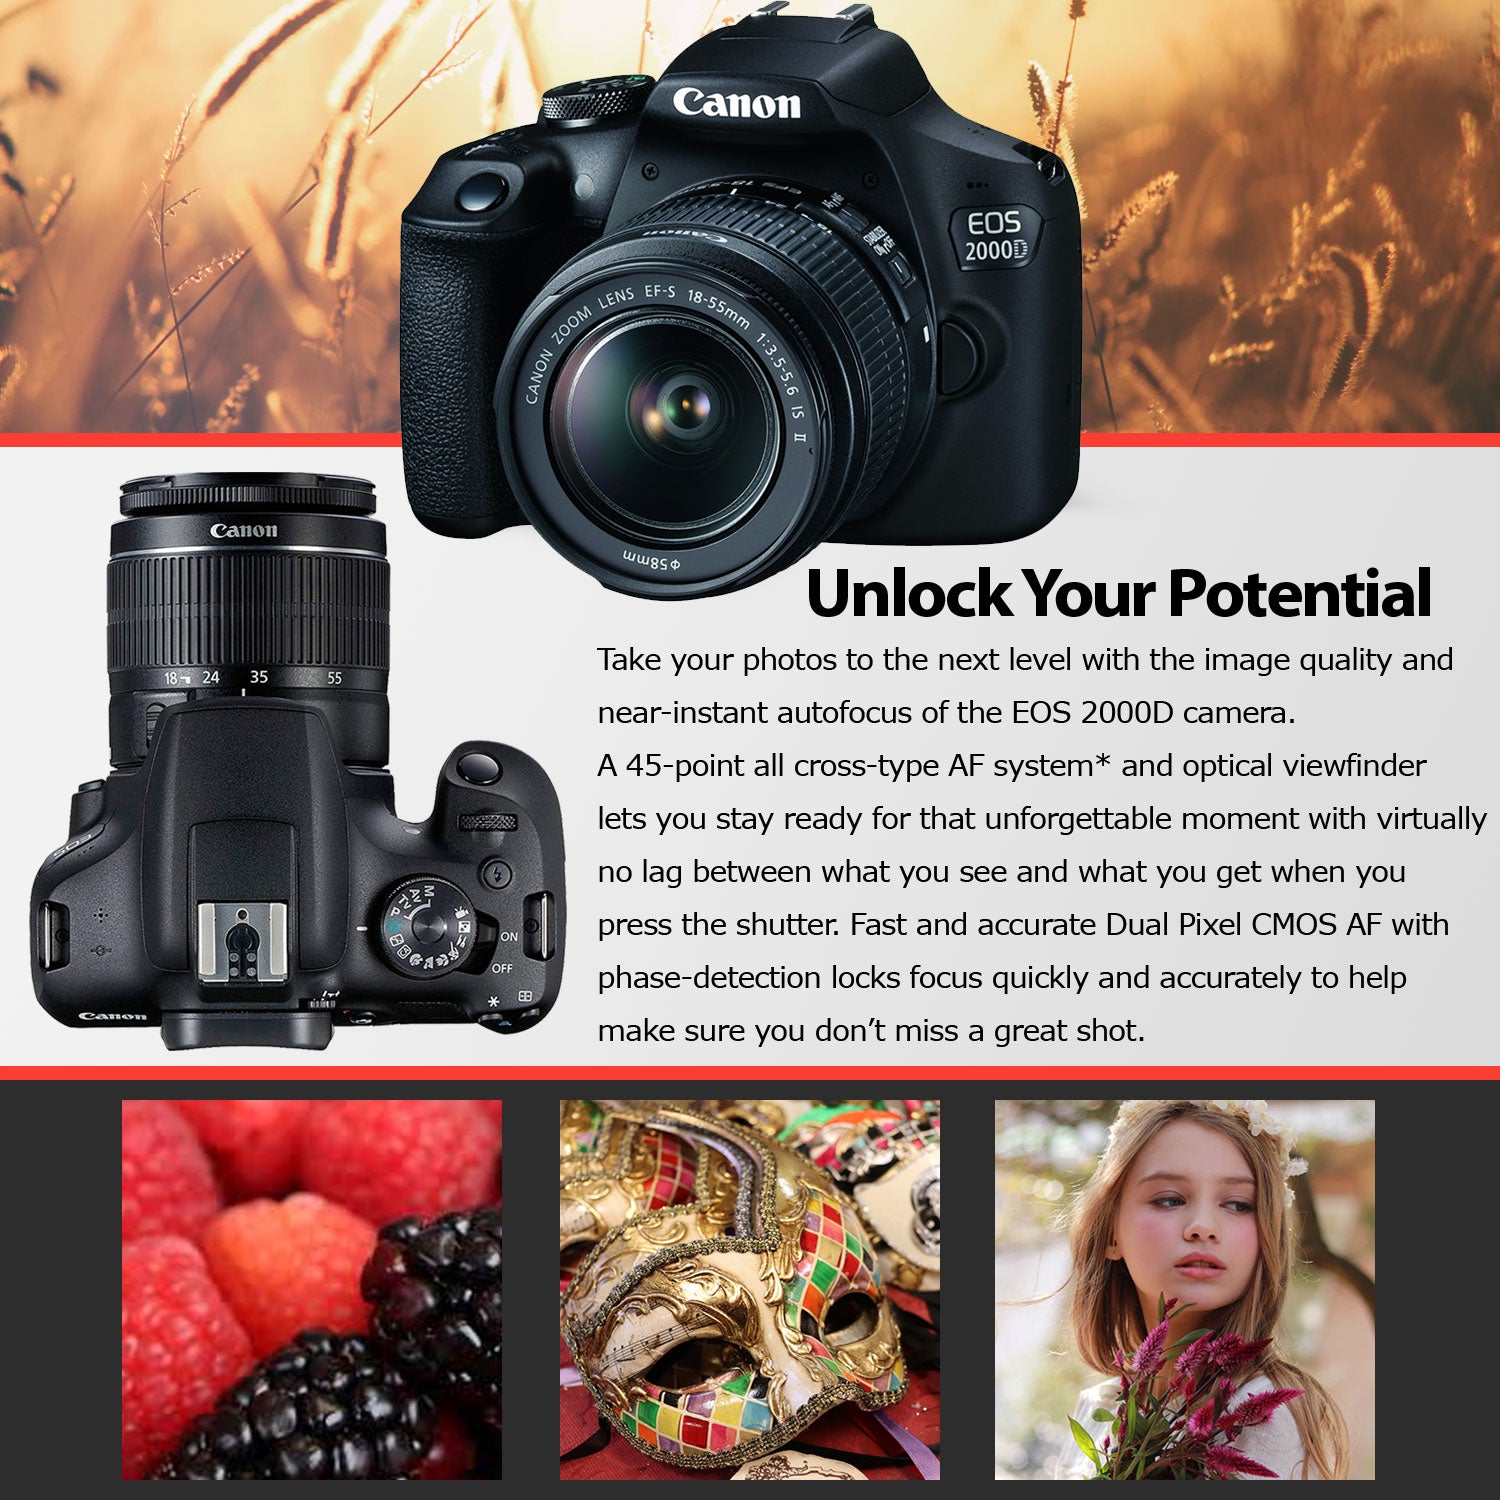 Canon EOS 2000D (Rebel t7) DSLR Camera and EF-S 18-55 mm f/3.5-5.6 IS III Lens + 75-300mm Telephoto Zoom Lens + 64GB Memory Card